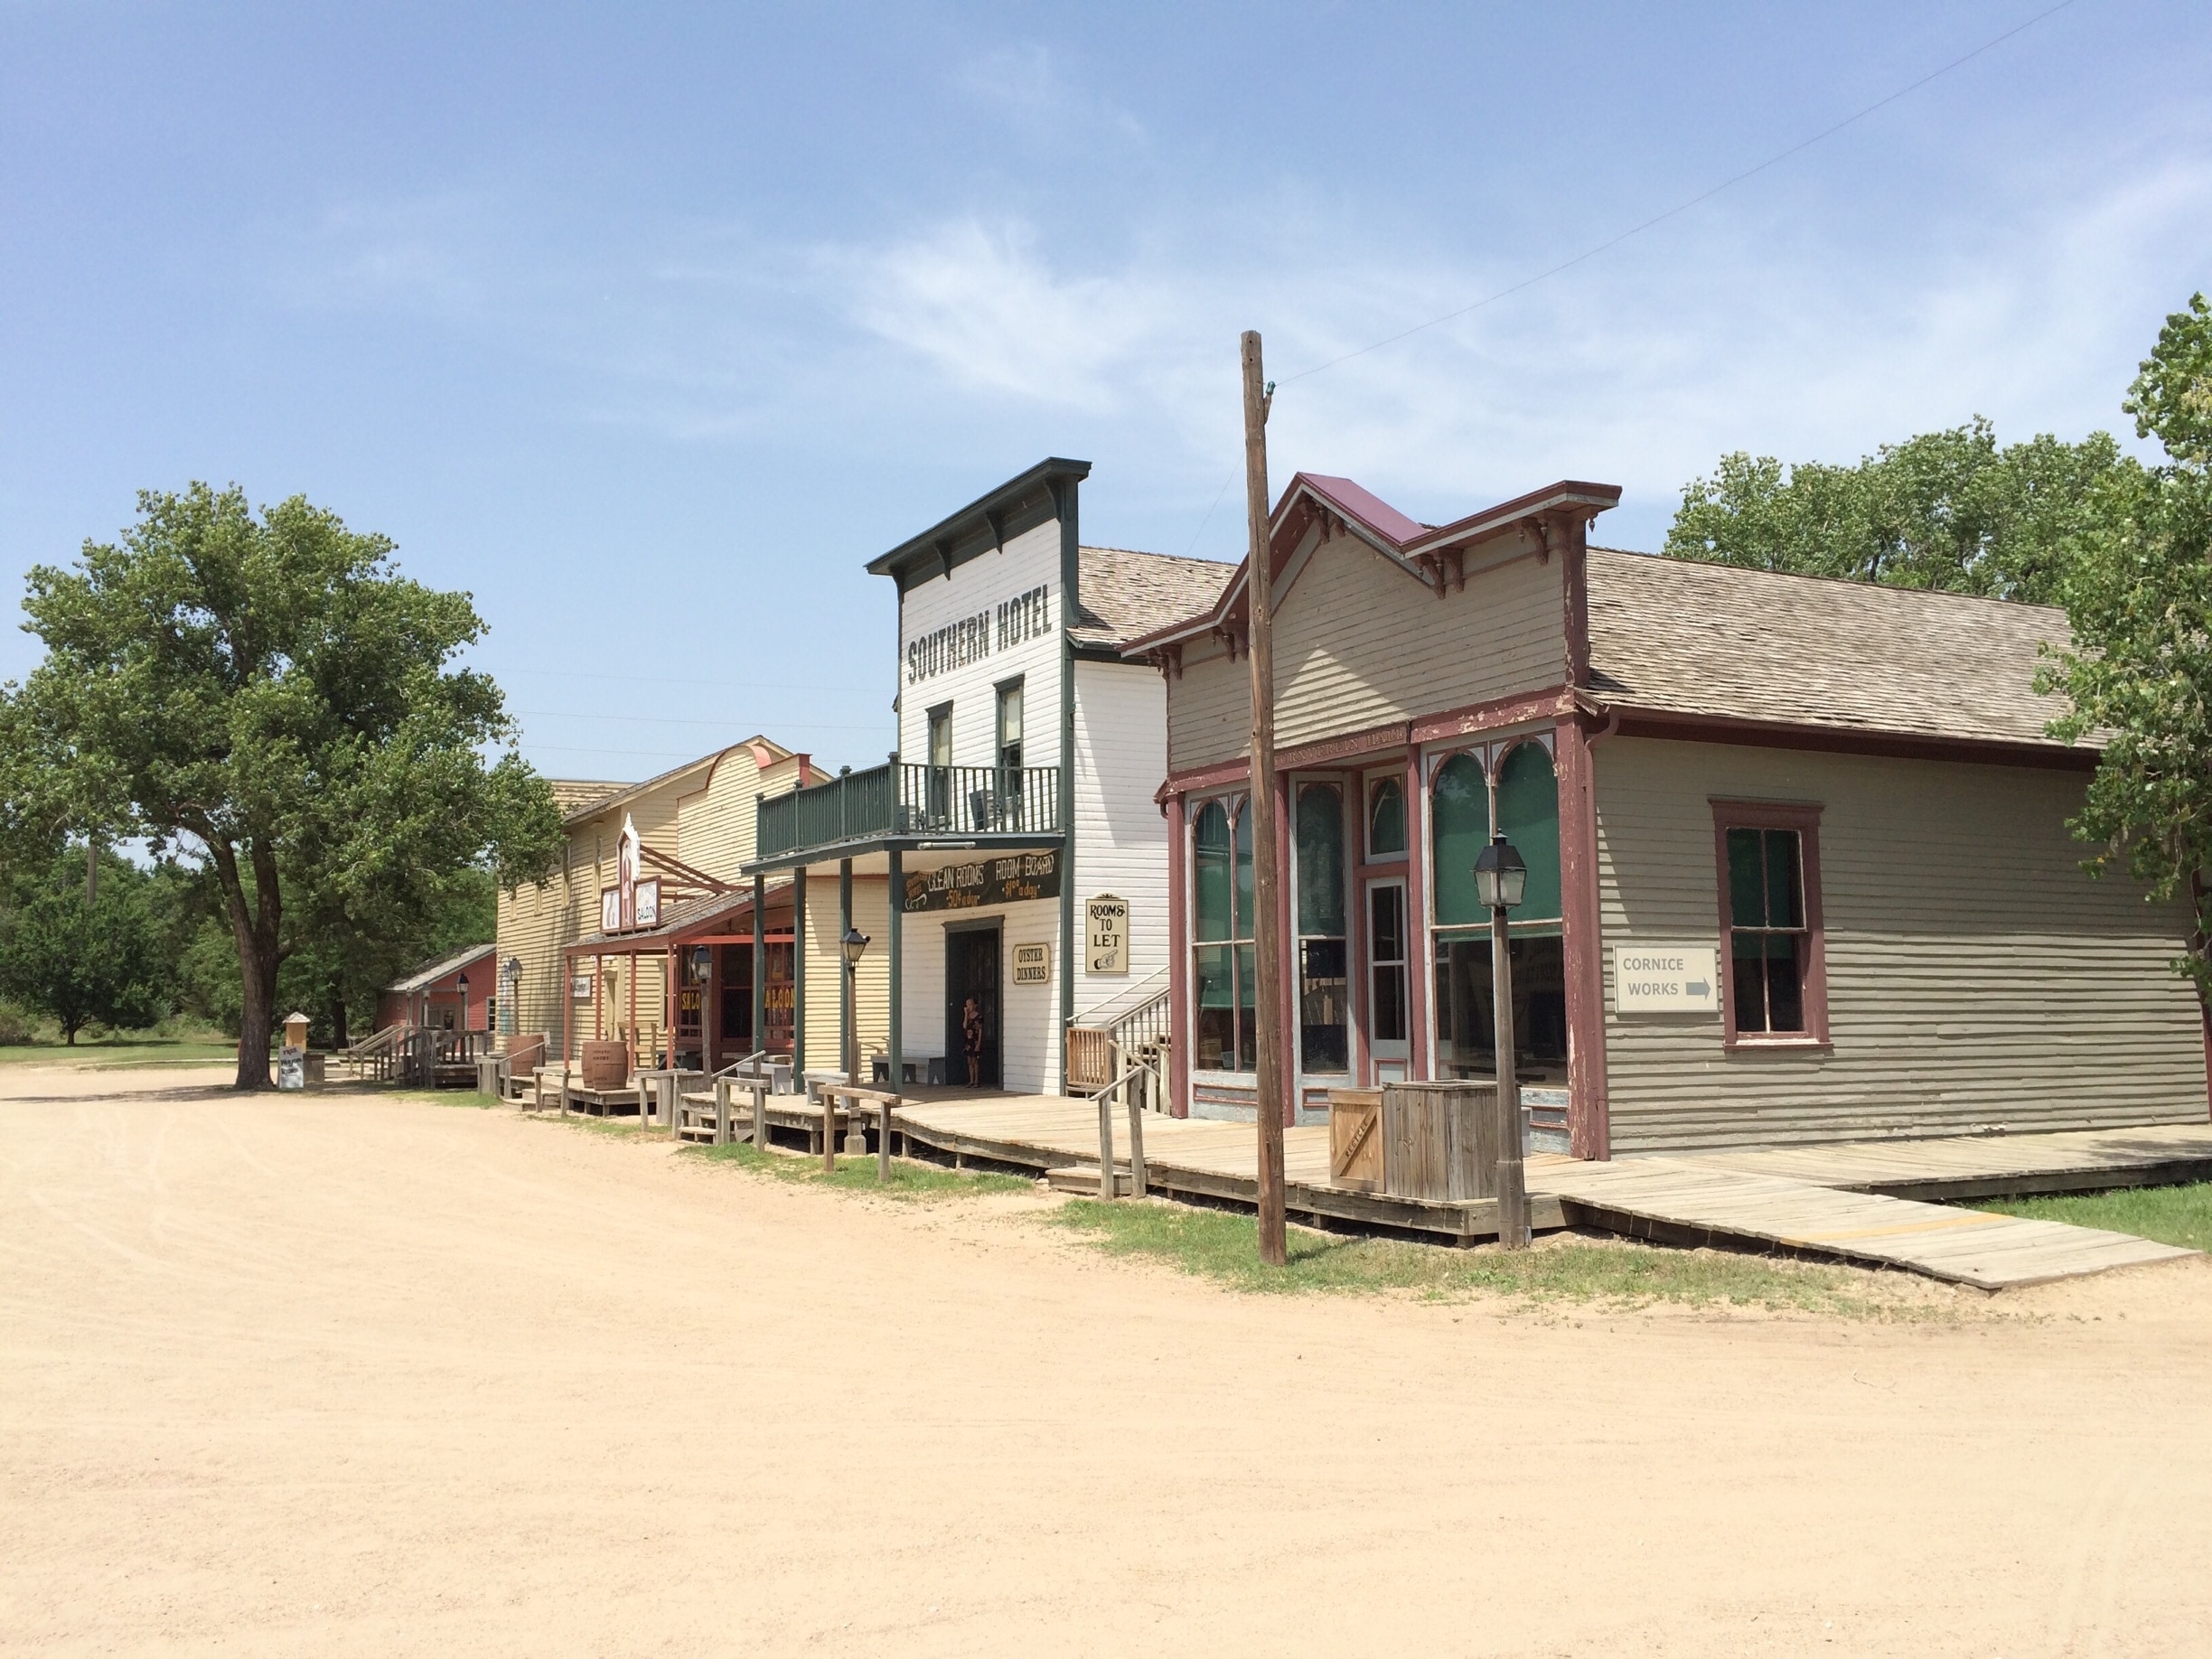 Put on your britches and saddle up. Cowtown is an interactive experience where the old western prairie comes to life. Tour historical homes and shops from 19th century Wichita, witness a gunfight in the street between the sheriff and two cattle rustlers or sit back and sip an ice cold sarsaparilla root beer in the local saloon.